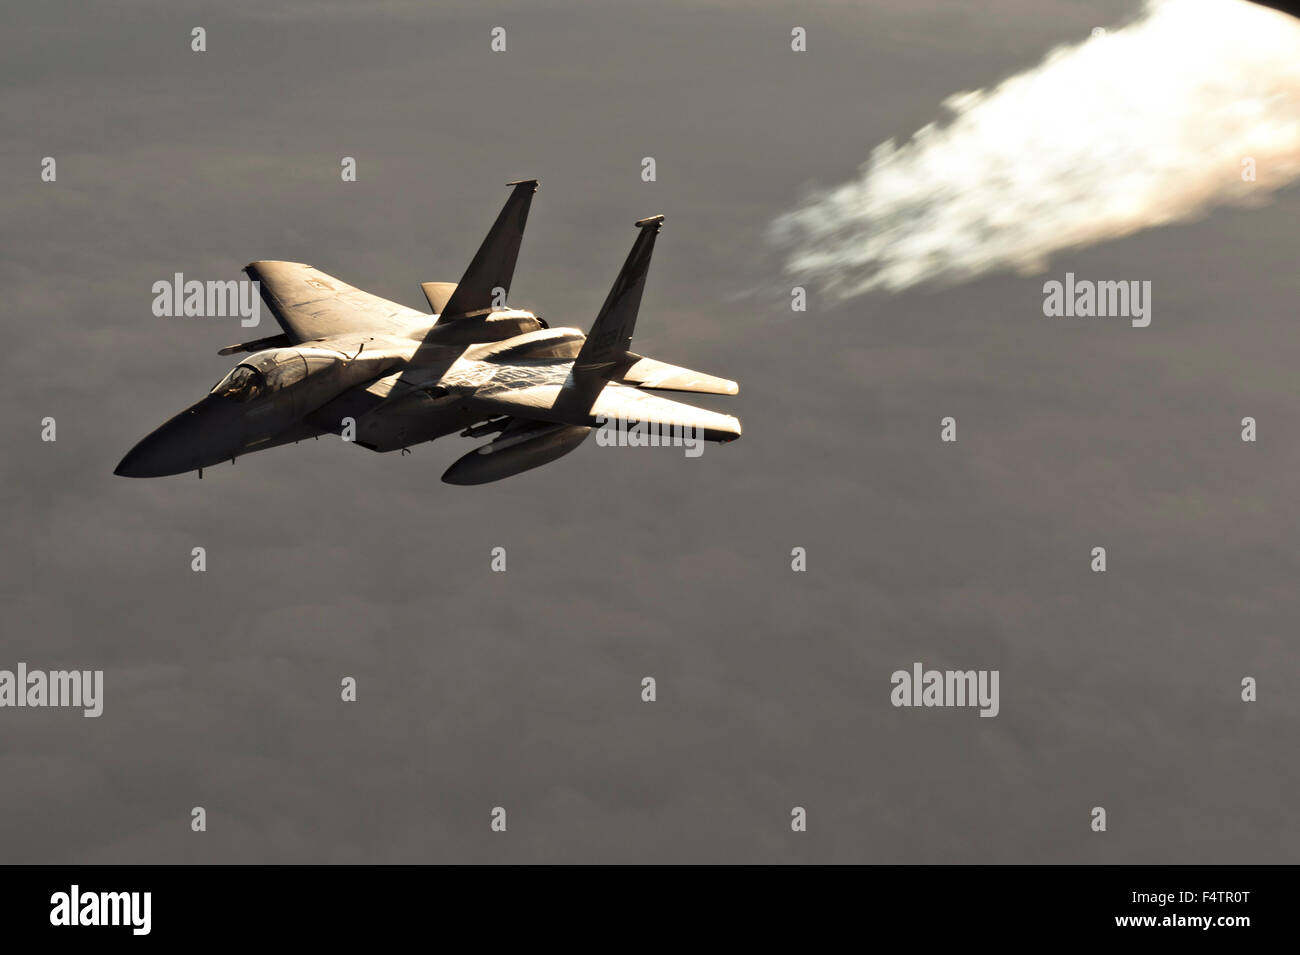 U.S Air Force F-15 Strike Eagle fighter aircraft after refueling mid-air during a mission in support of Vigilant Shield October 20, 2015 over Iqaluit, Nunavut, Canada. Stock Photo